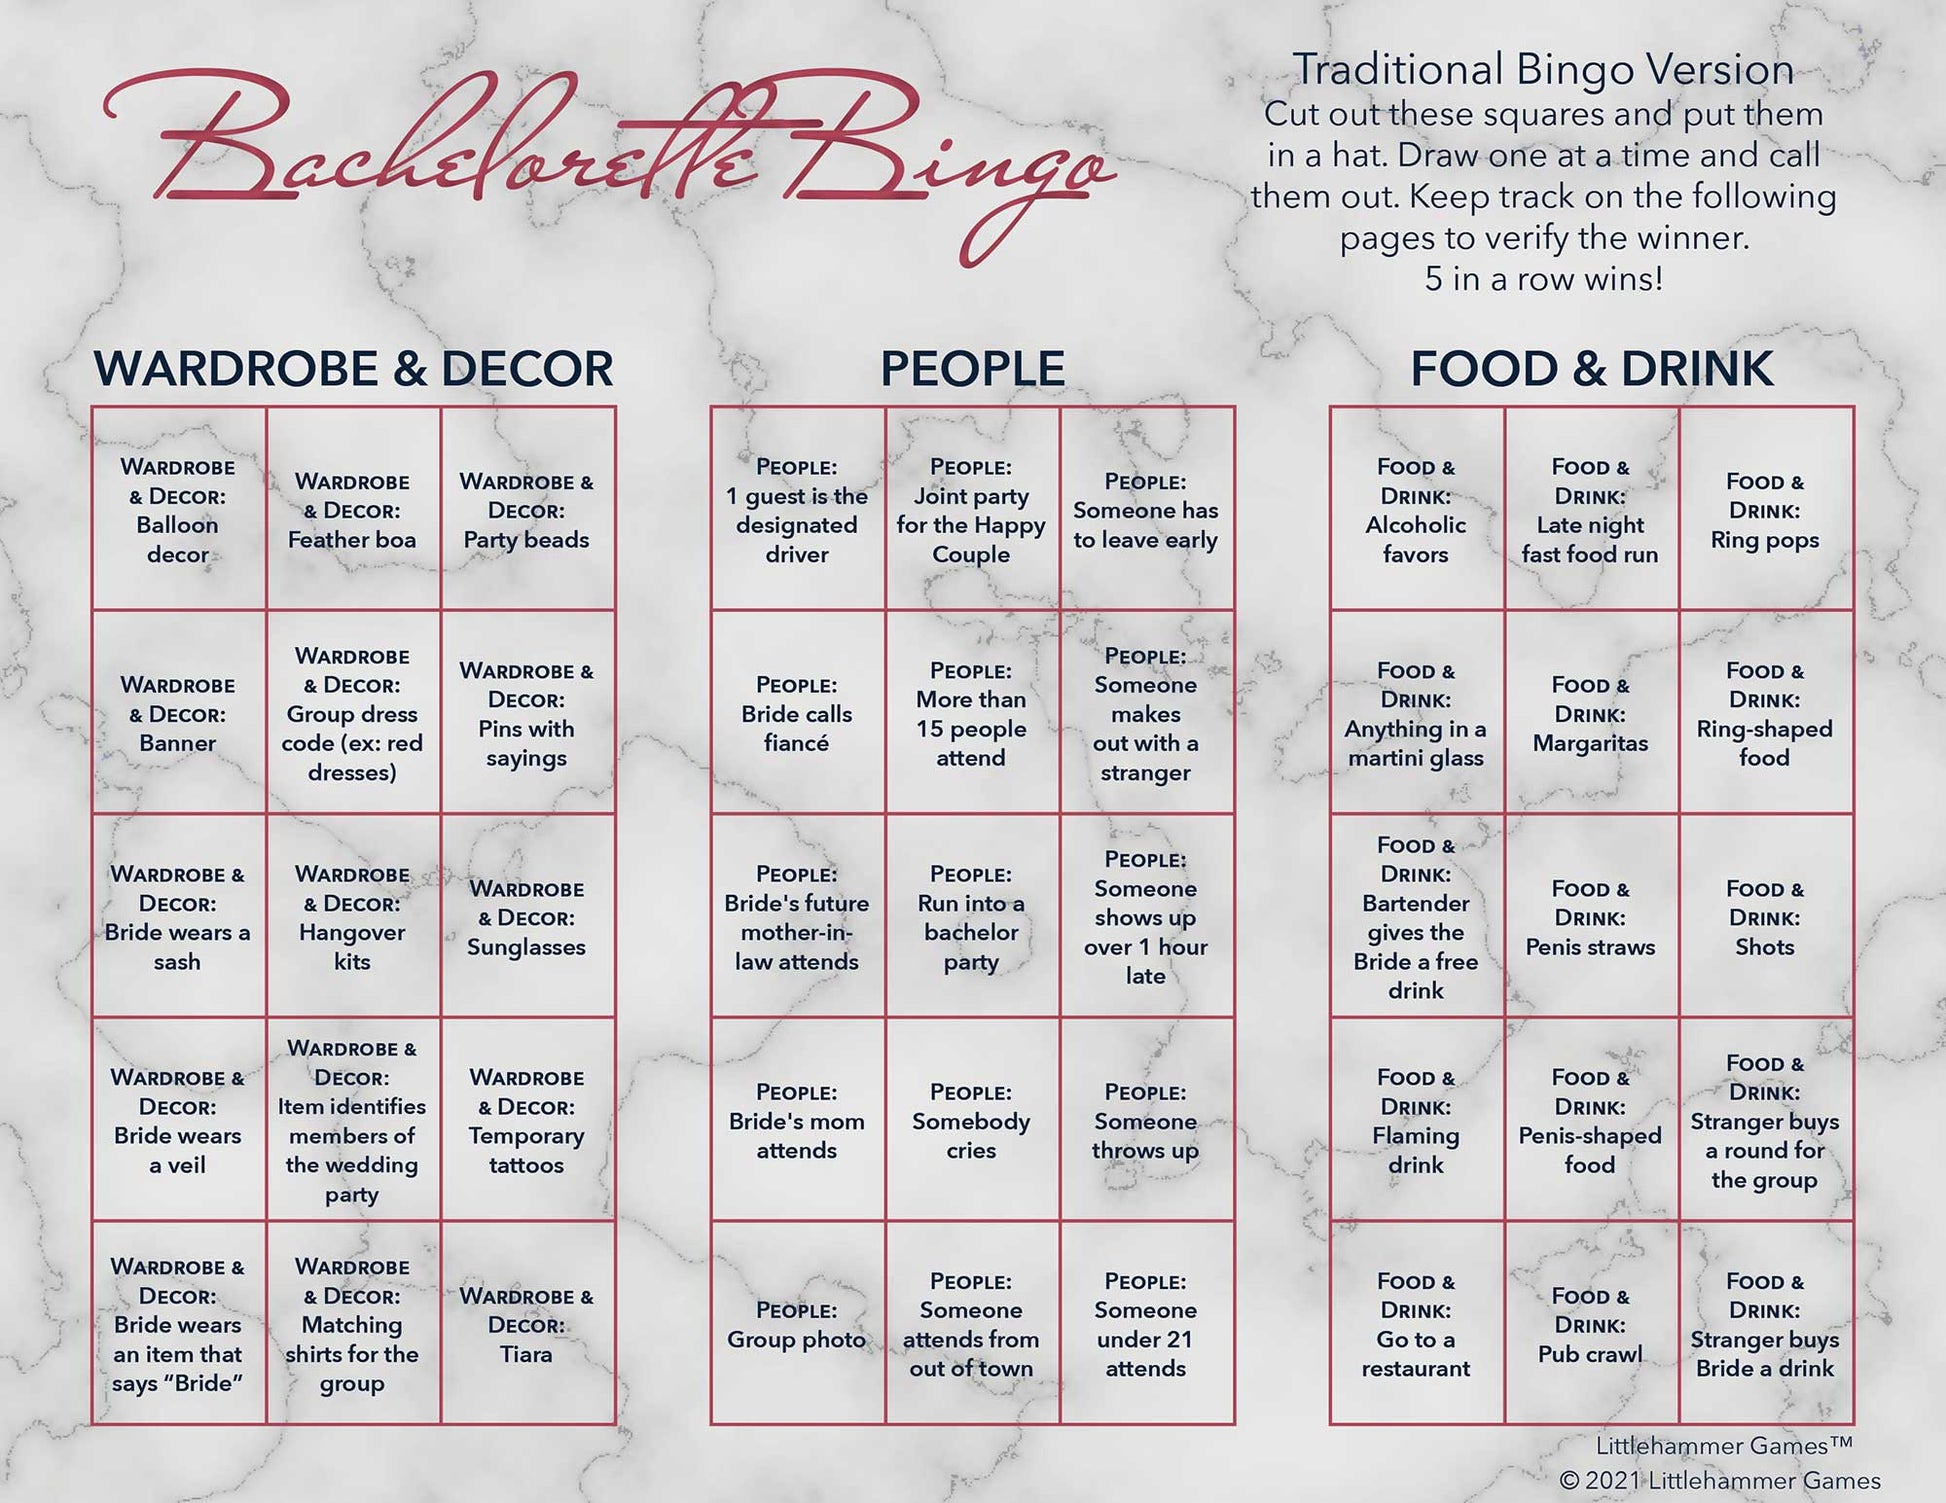 Bachelorette Bingo calling card with rose gold text on a marble background